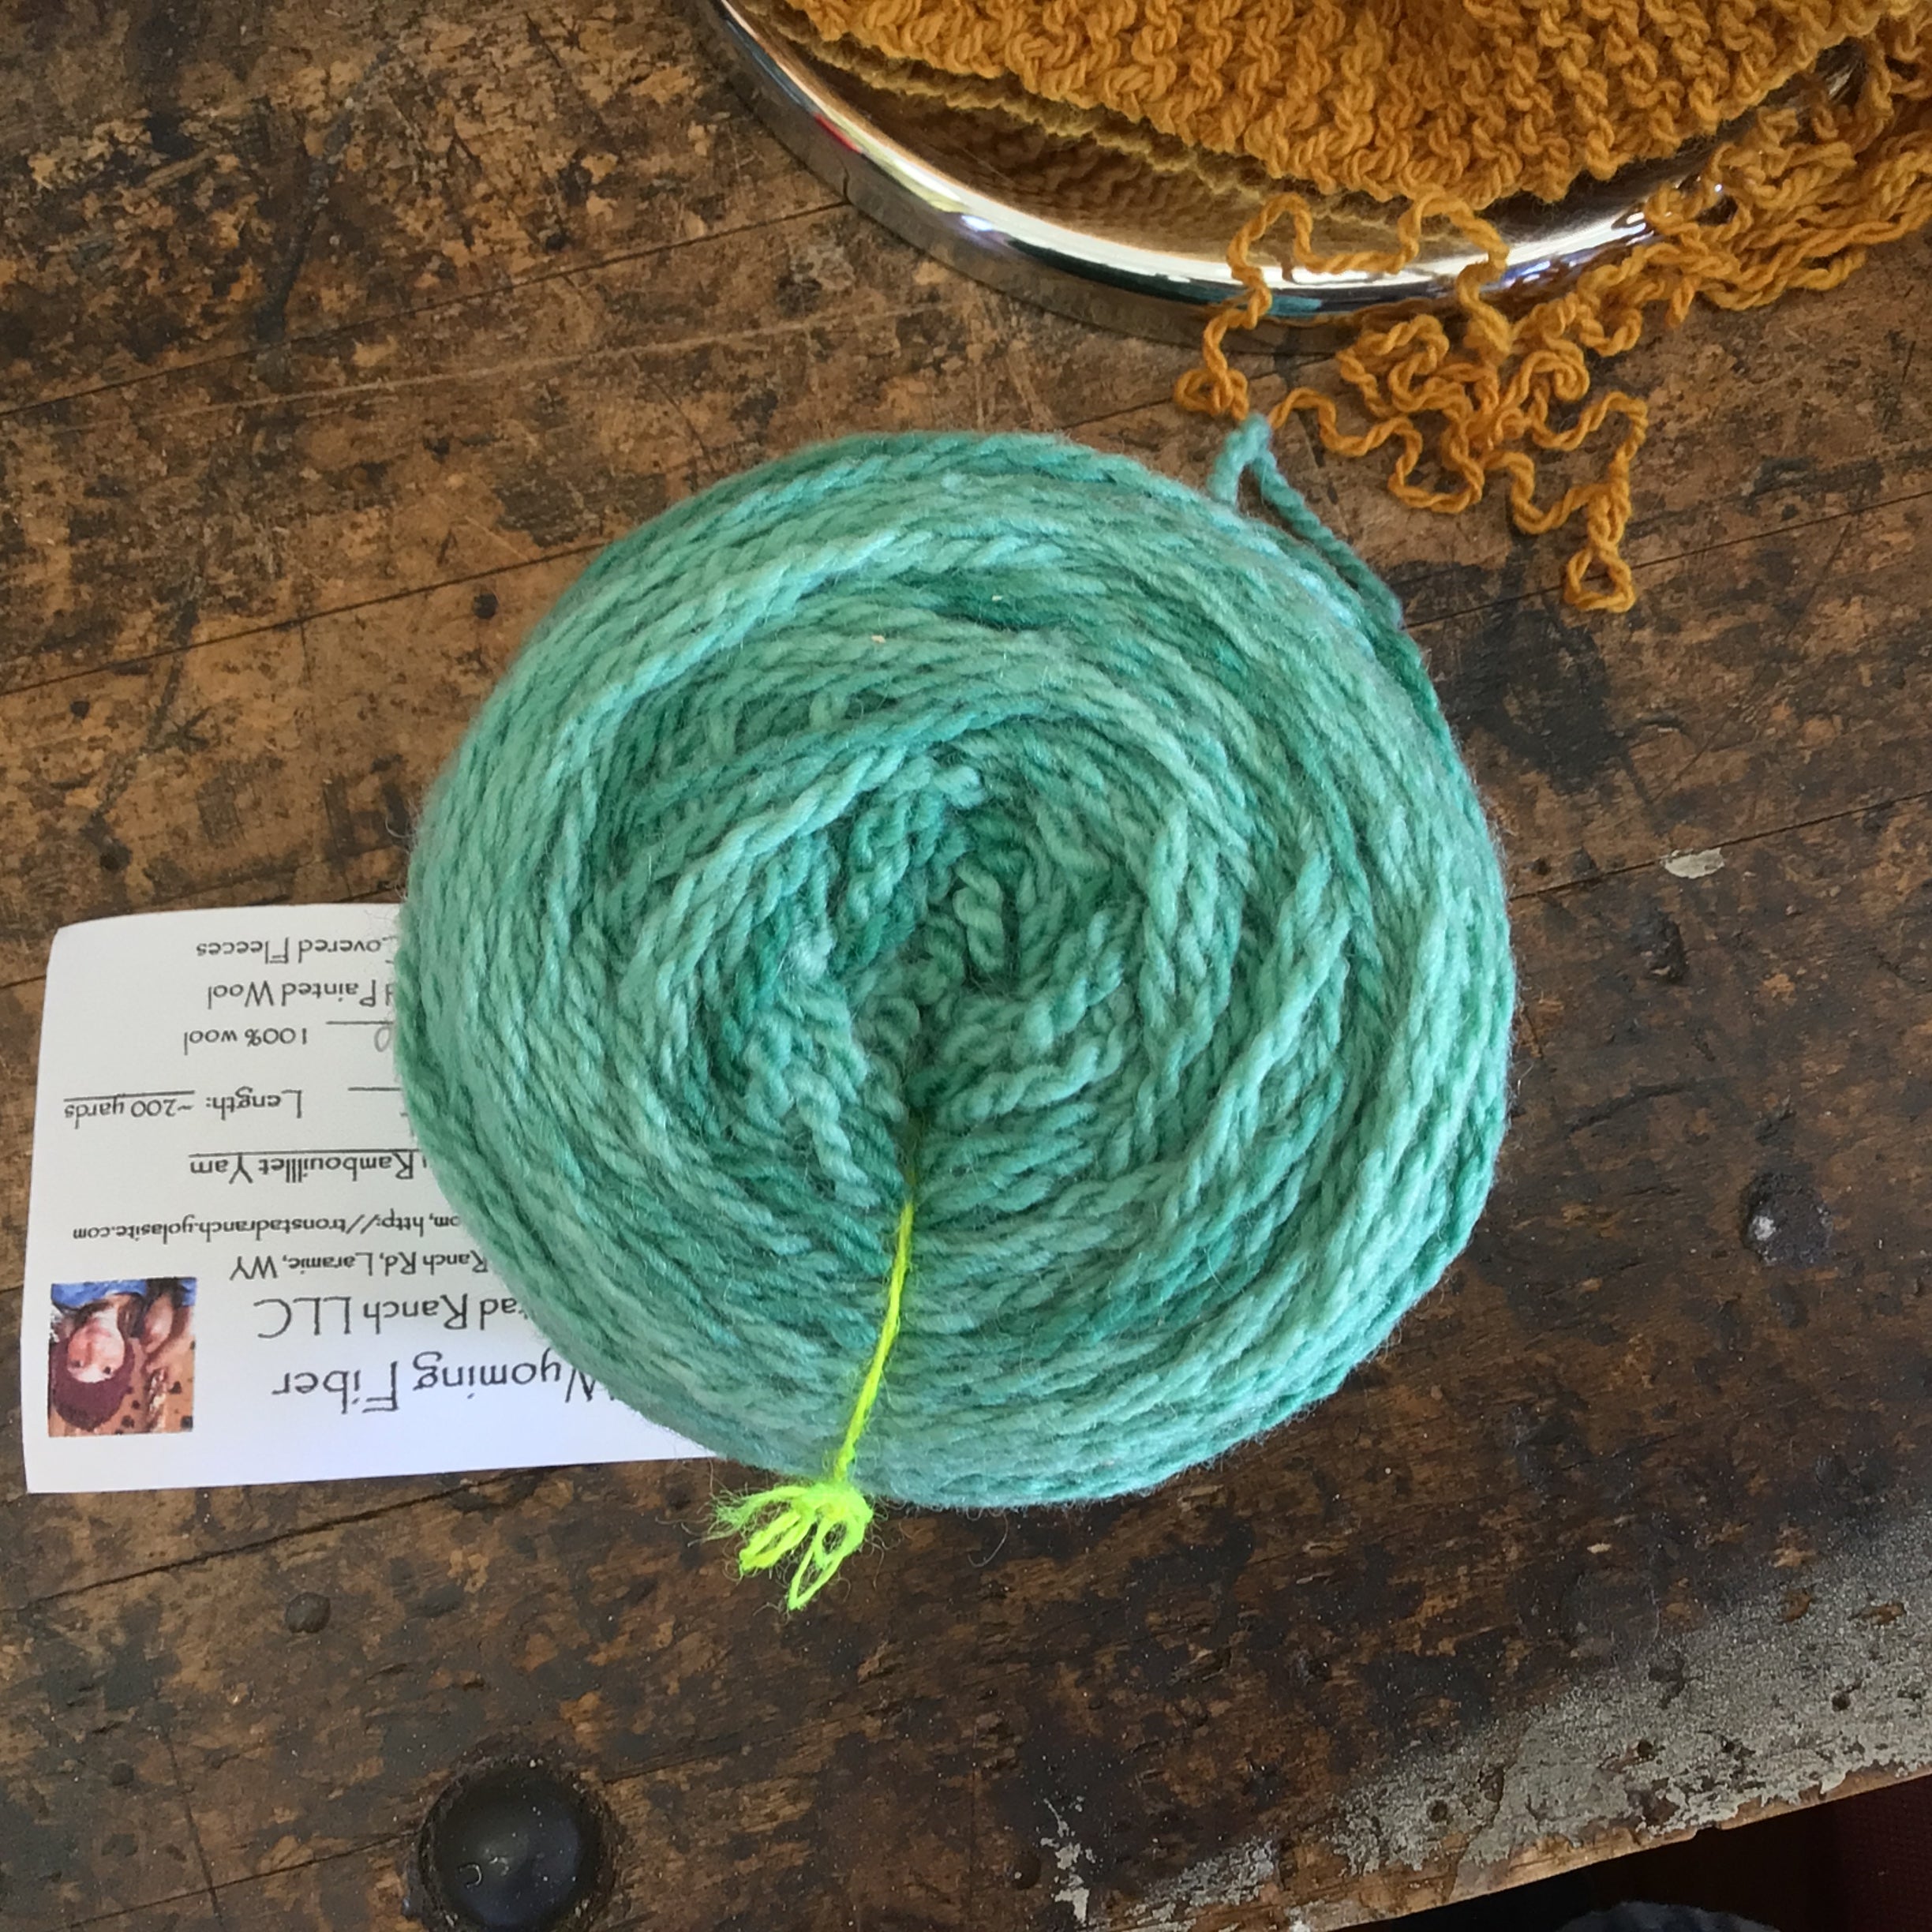 Tronstad Ranch Rambouillet 2 Ply Worsted Weight Yarn - Spearmint